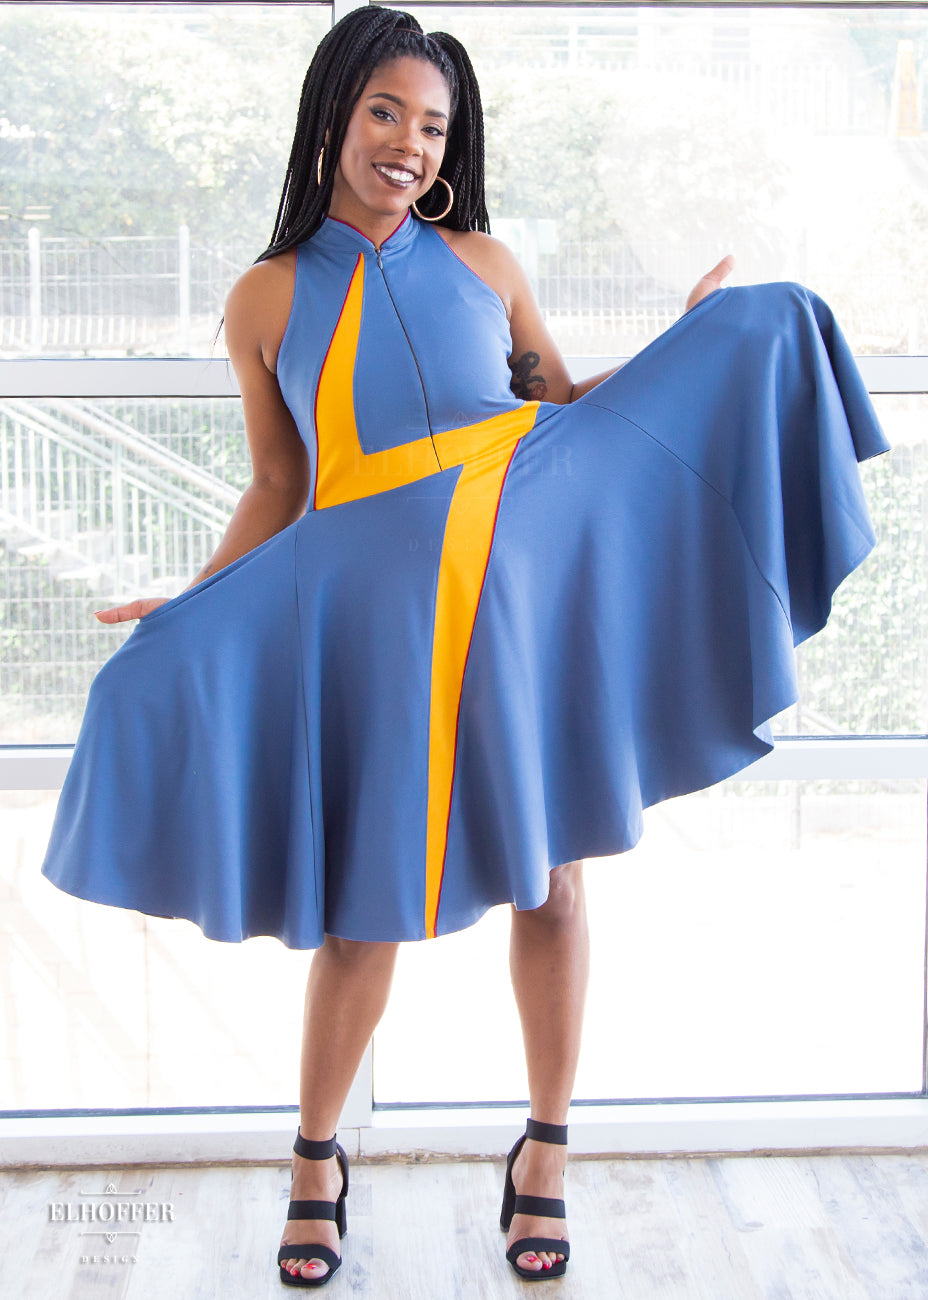 Krystina, a size small medium dark skinned model with long braids, holds out the full skirt of the high-necked sleeveless blue dress. The dress is piped in crimson and has a yellow lightening bolt emblazoned over the front of it. There is a zip down the middle down to the waist.